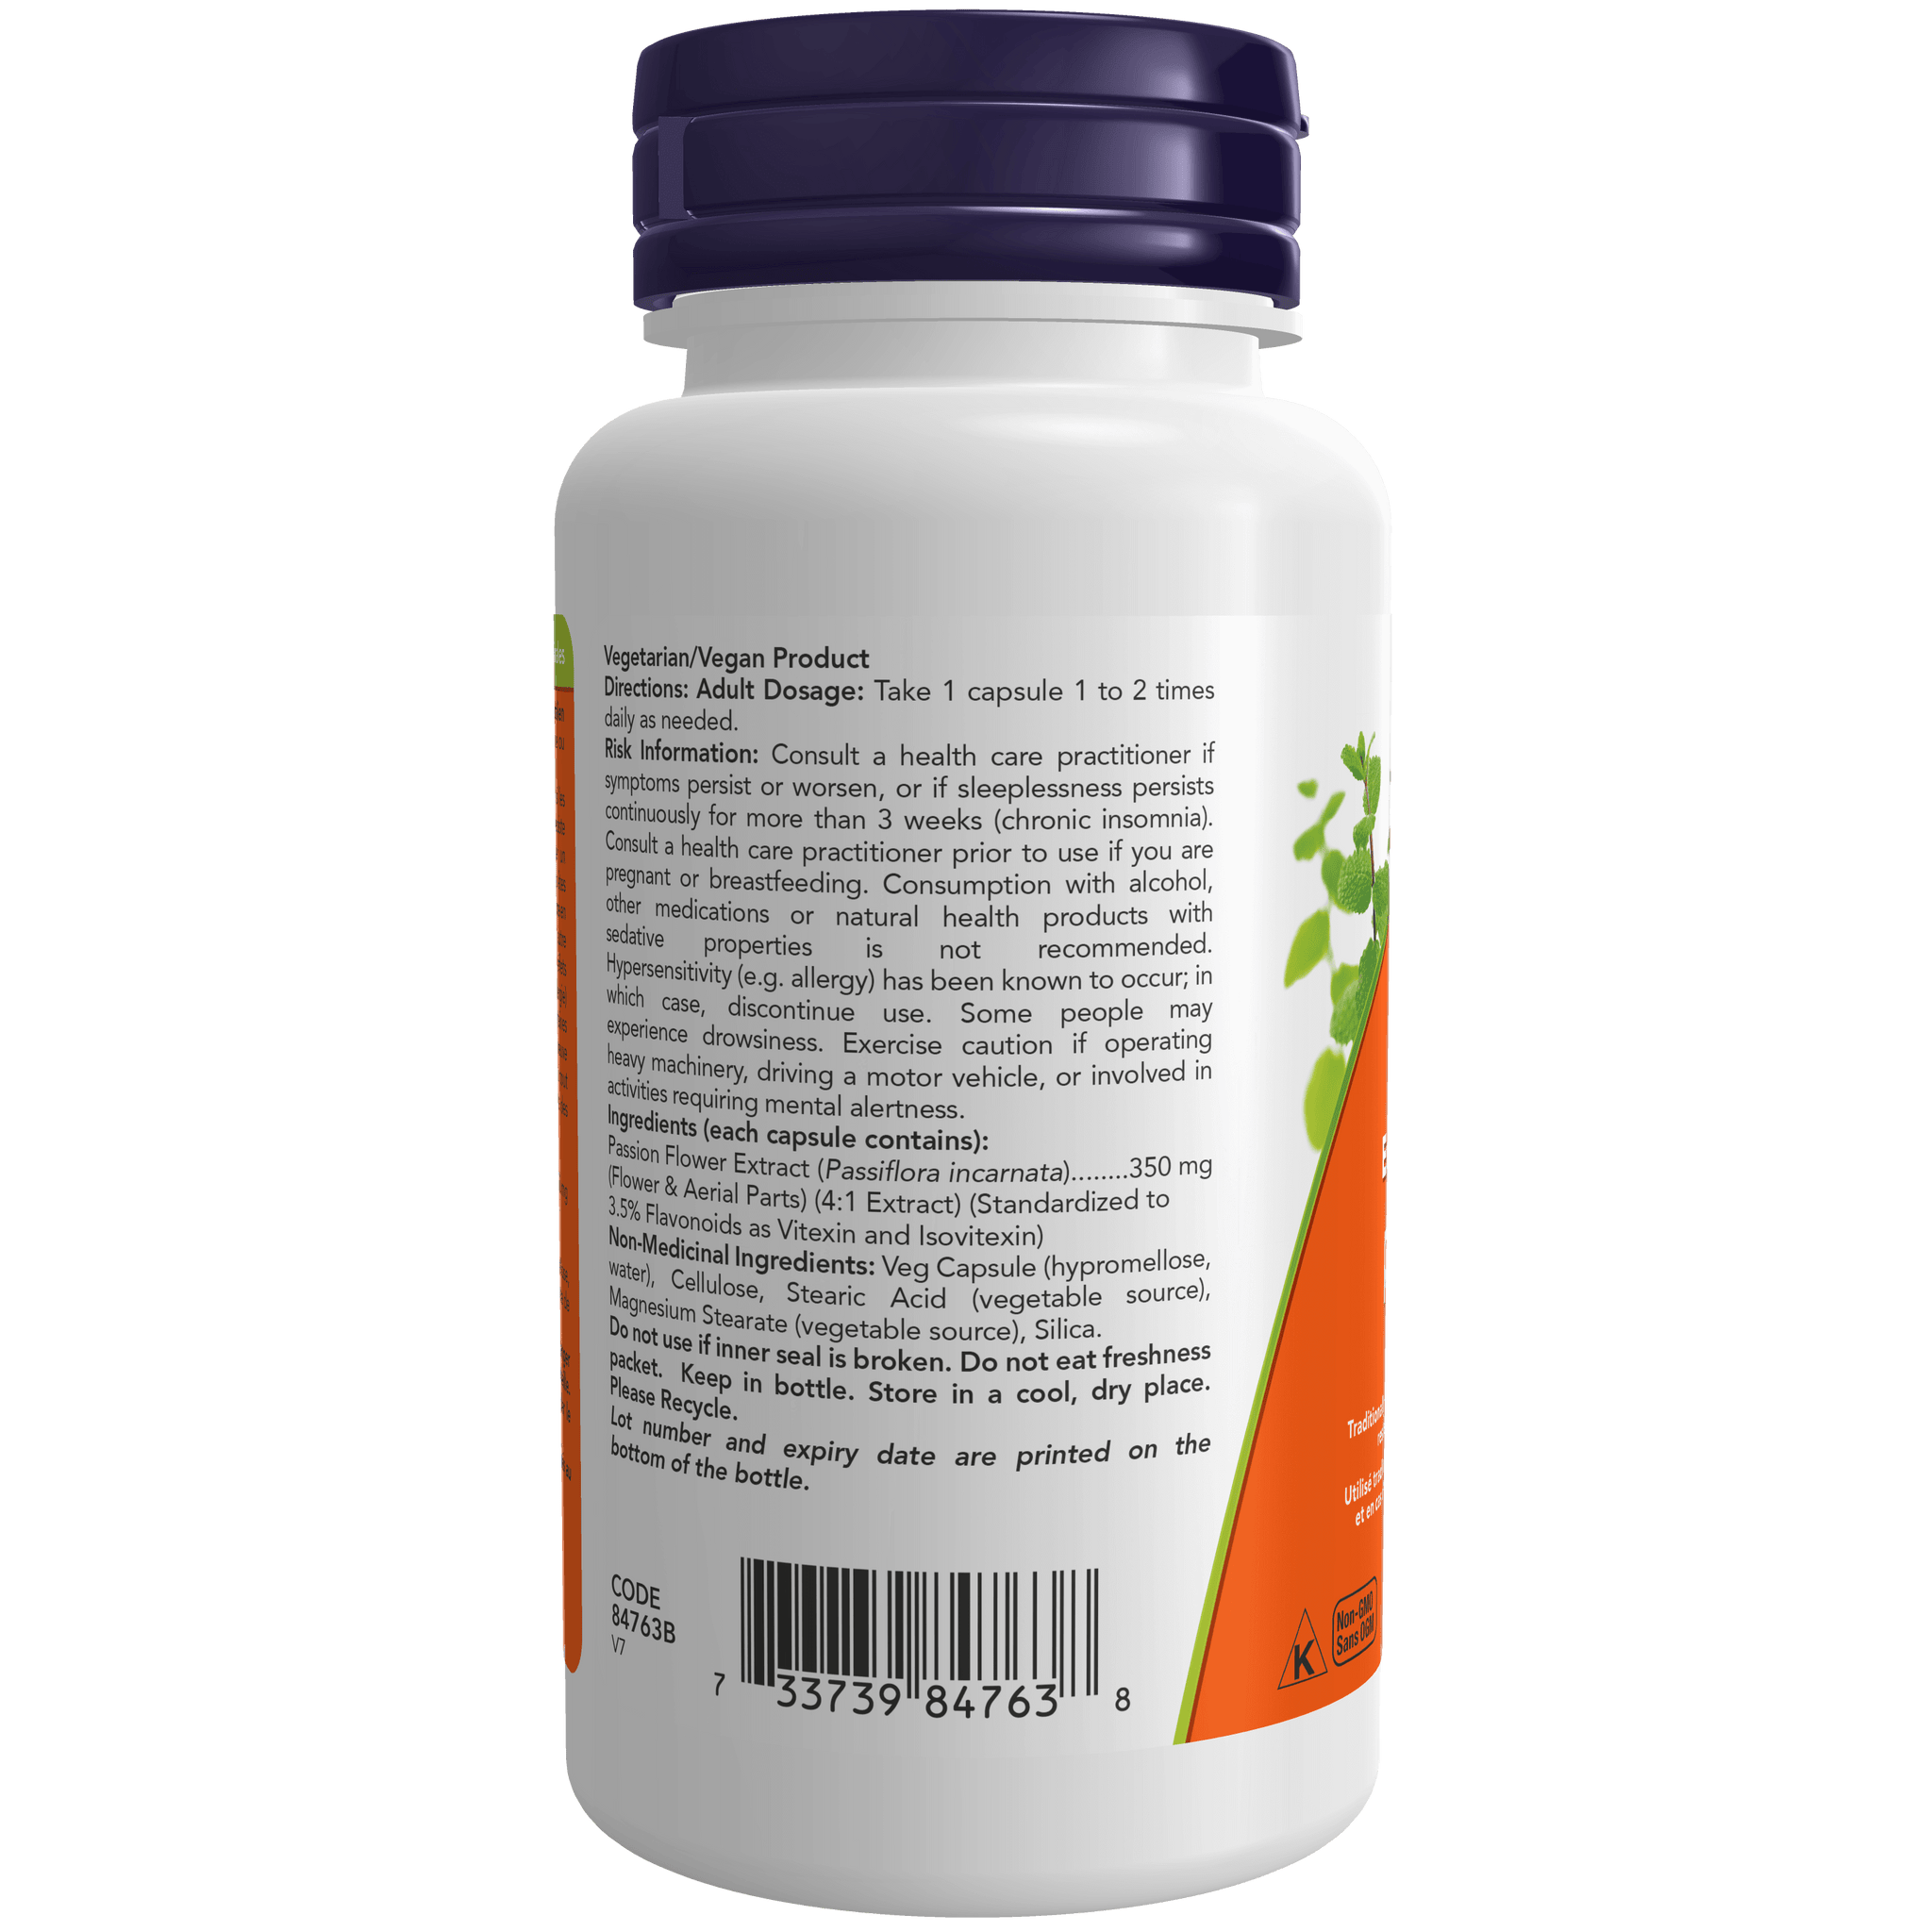 NOW Passion Flower Extract 350mg